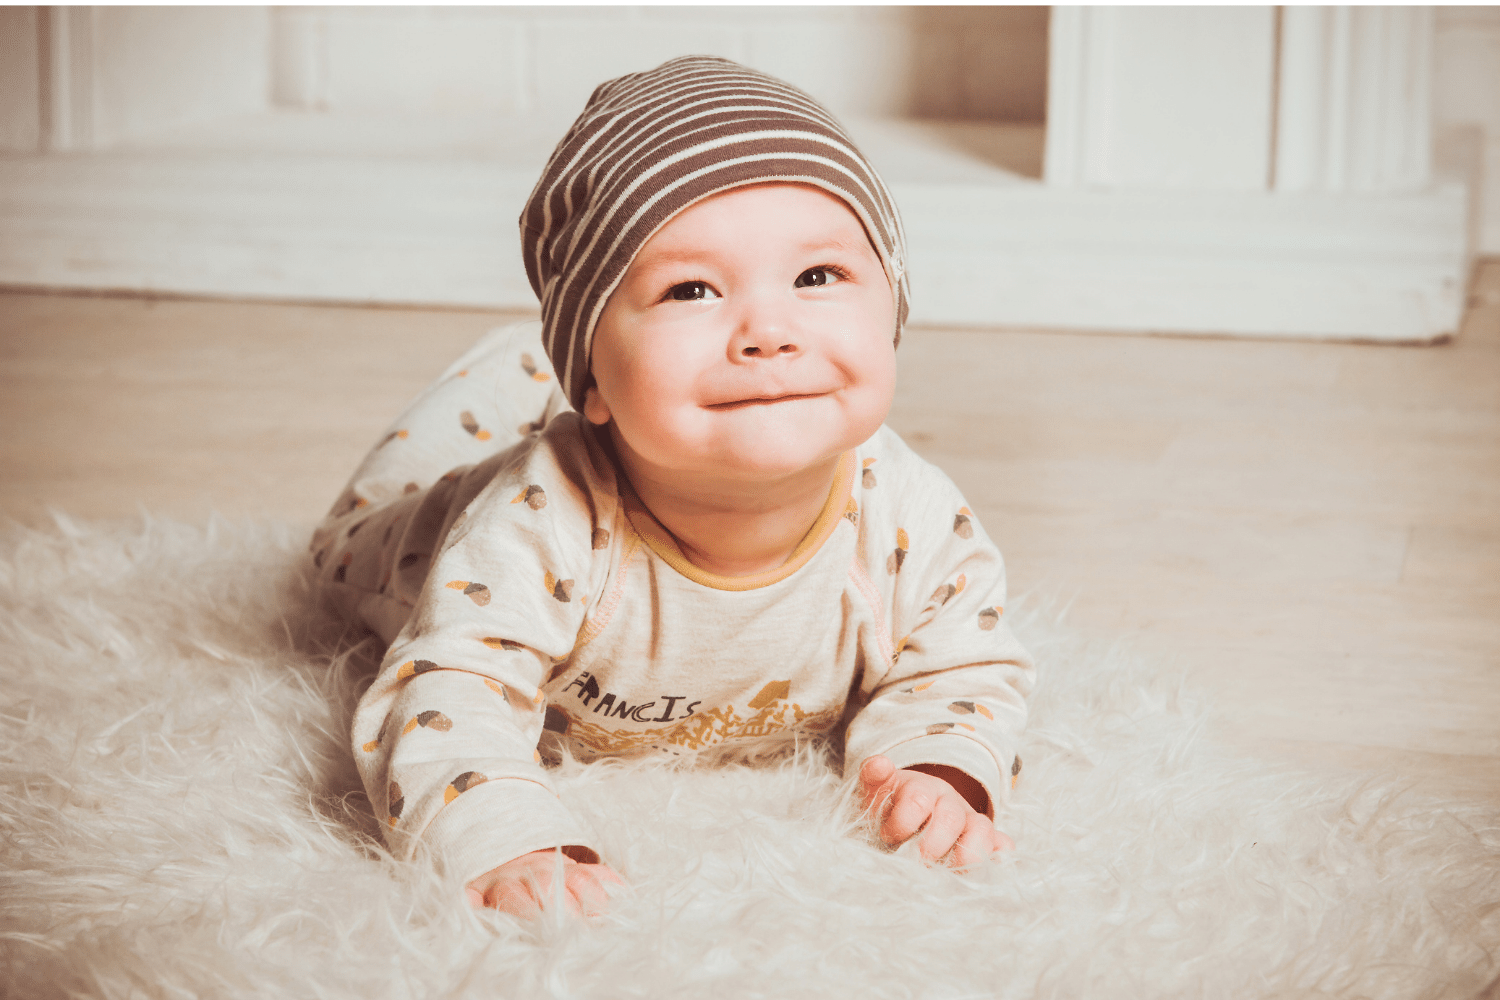 The 6 Best Vitamin D Drops for Infants - Time to Shine